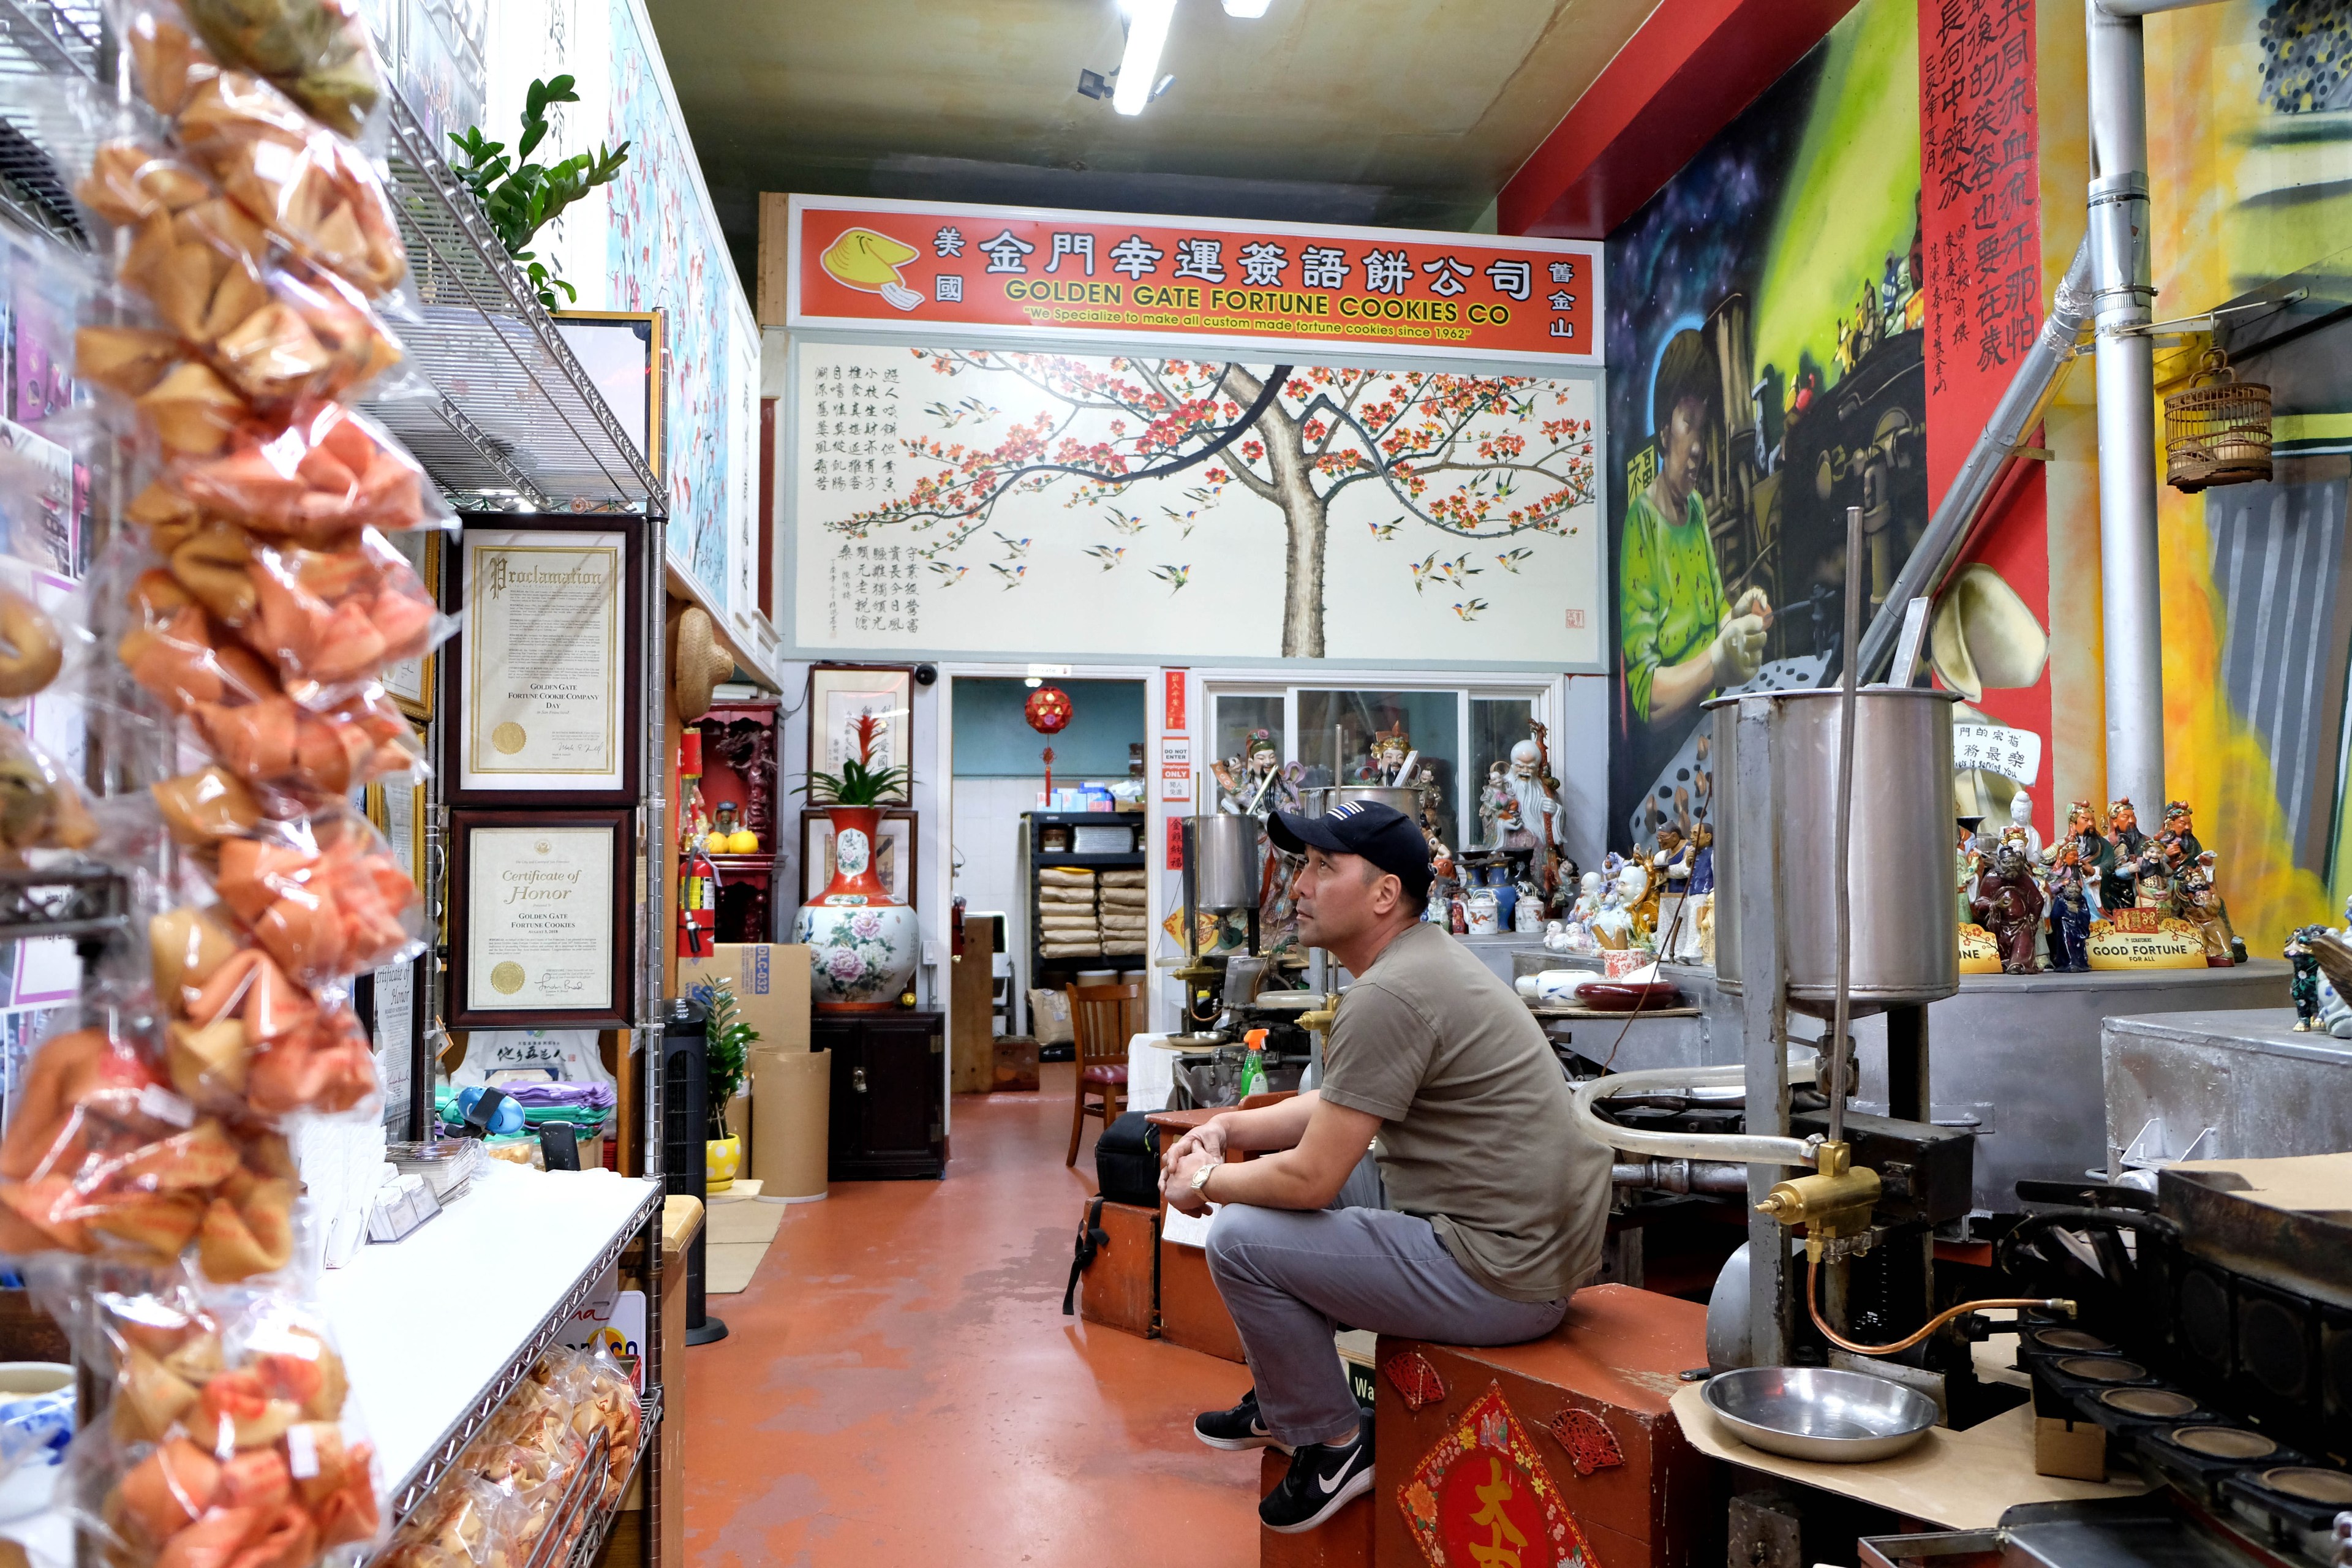 A man sits in a tiny factory space that has fortune cookie making equipment and bags of fortune cookies.